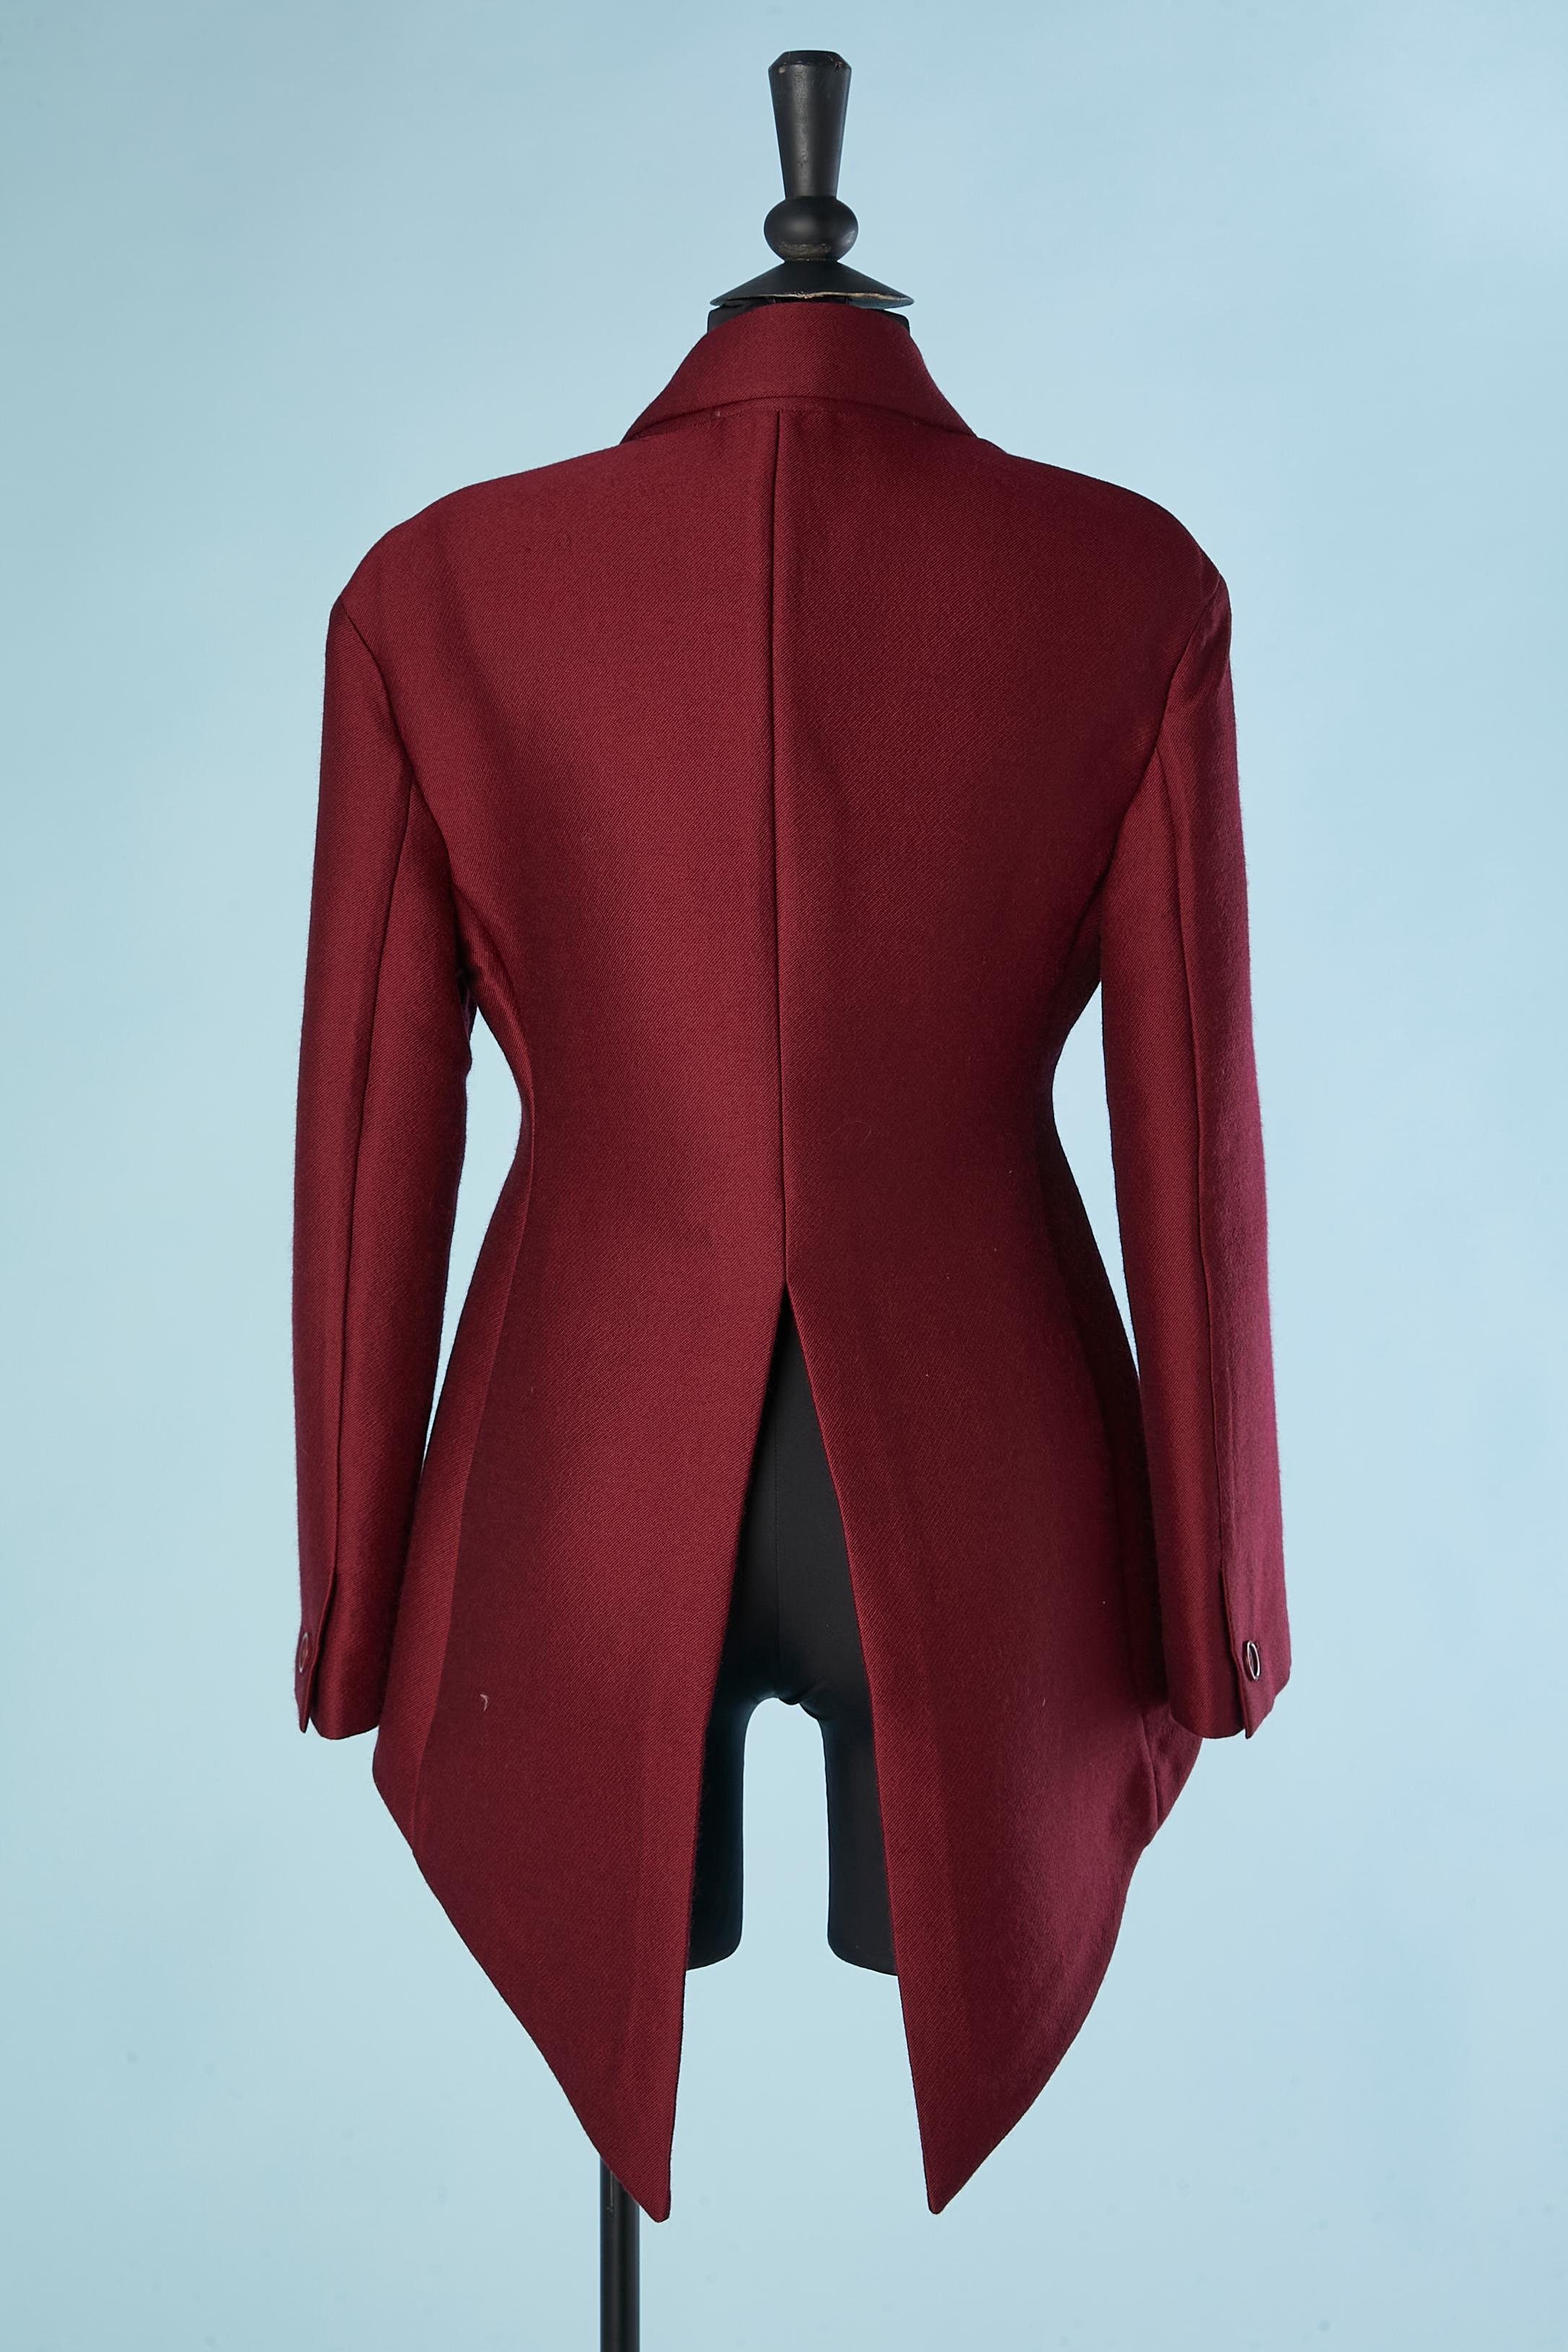 Wool burgundy single-breasted tail-jacket Romeo Gigli  In Excellent Condition For Sale In Saint-Ouen-Sur-Seine, FR